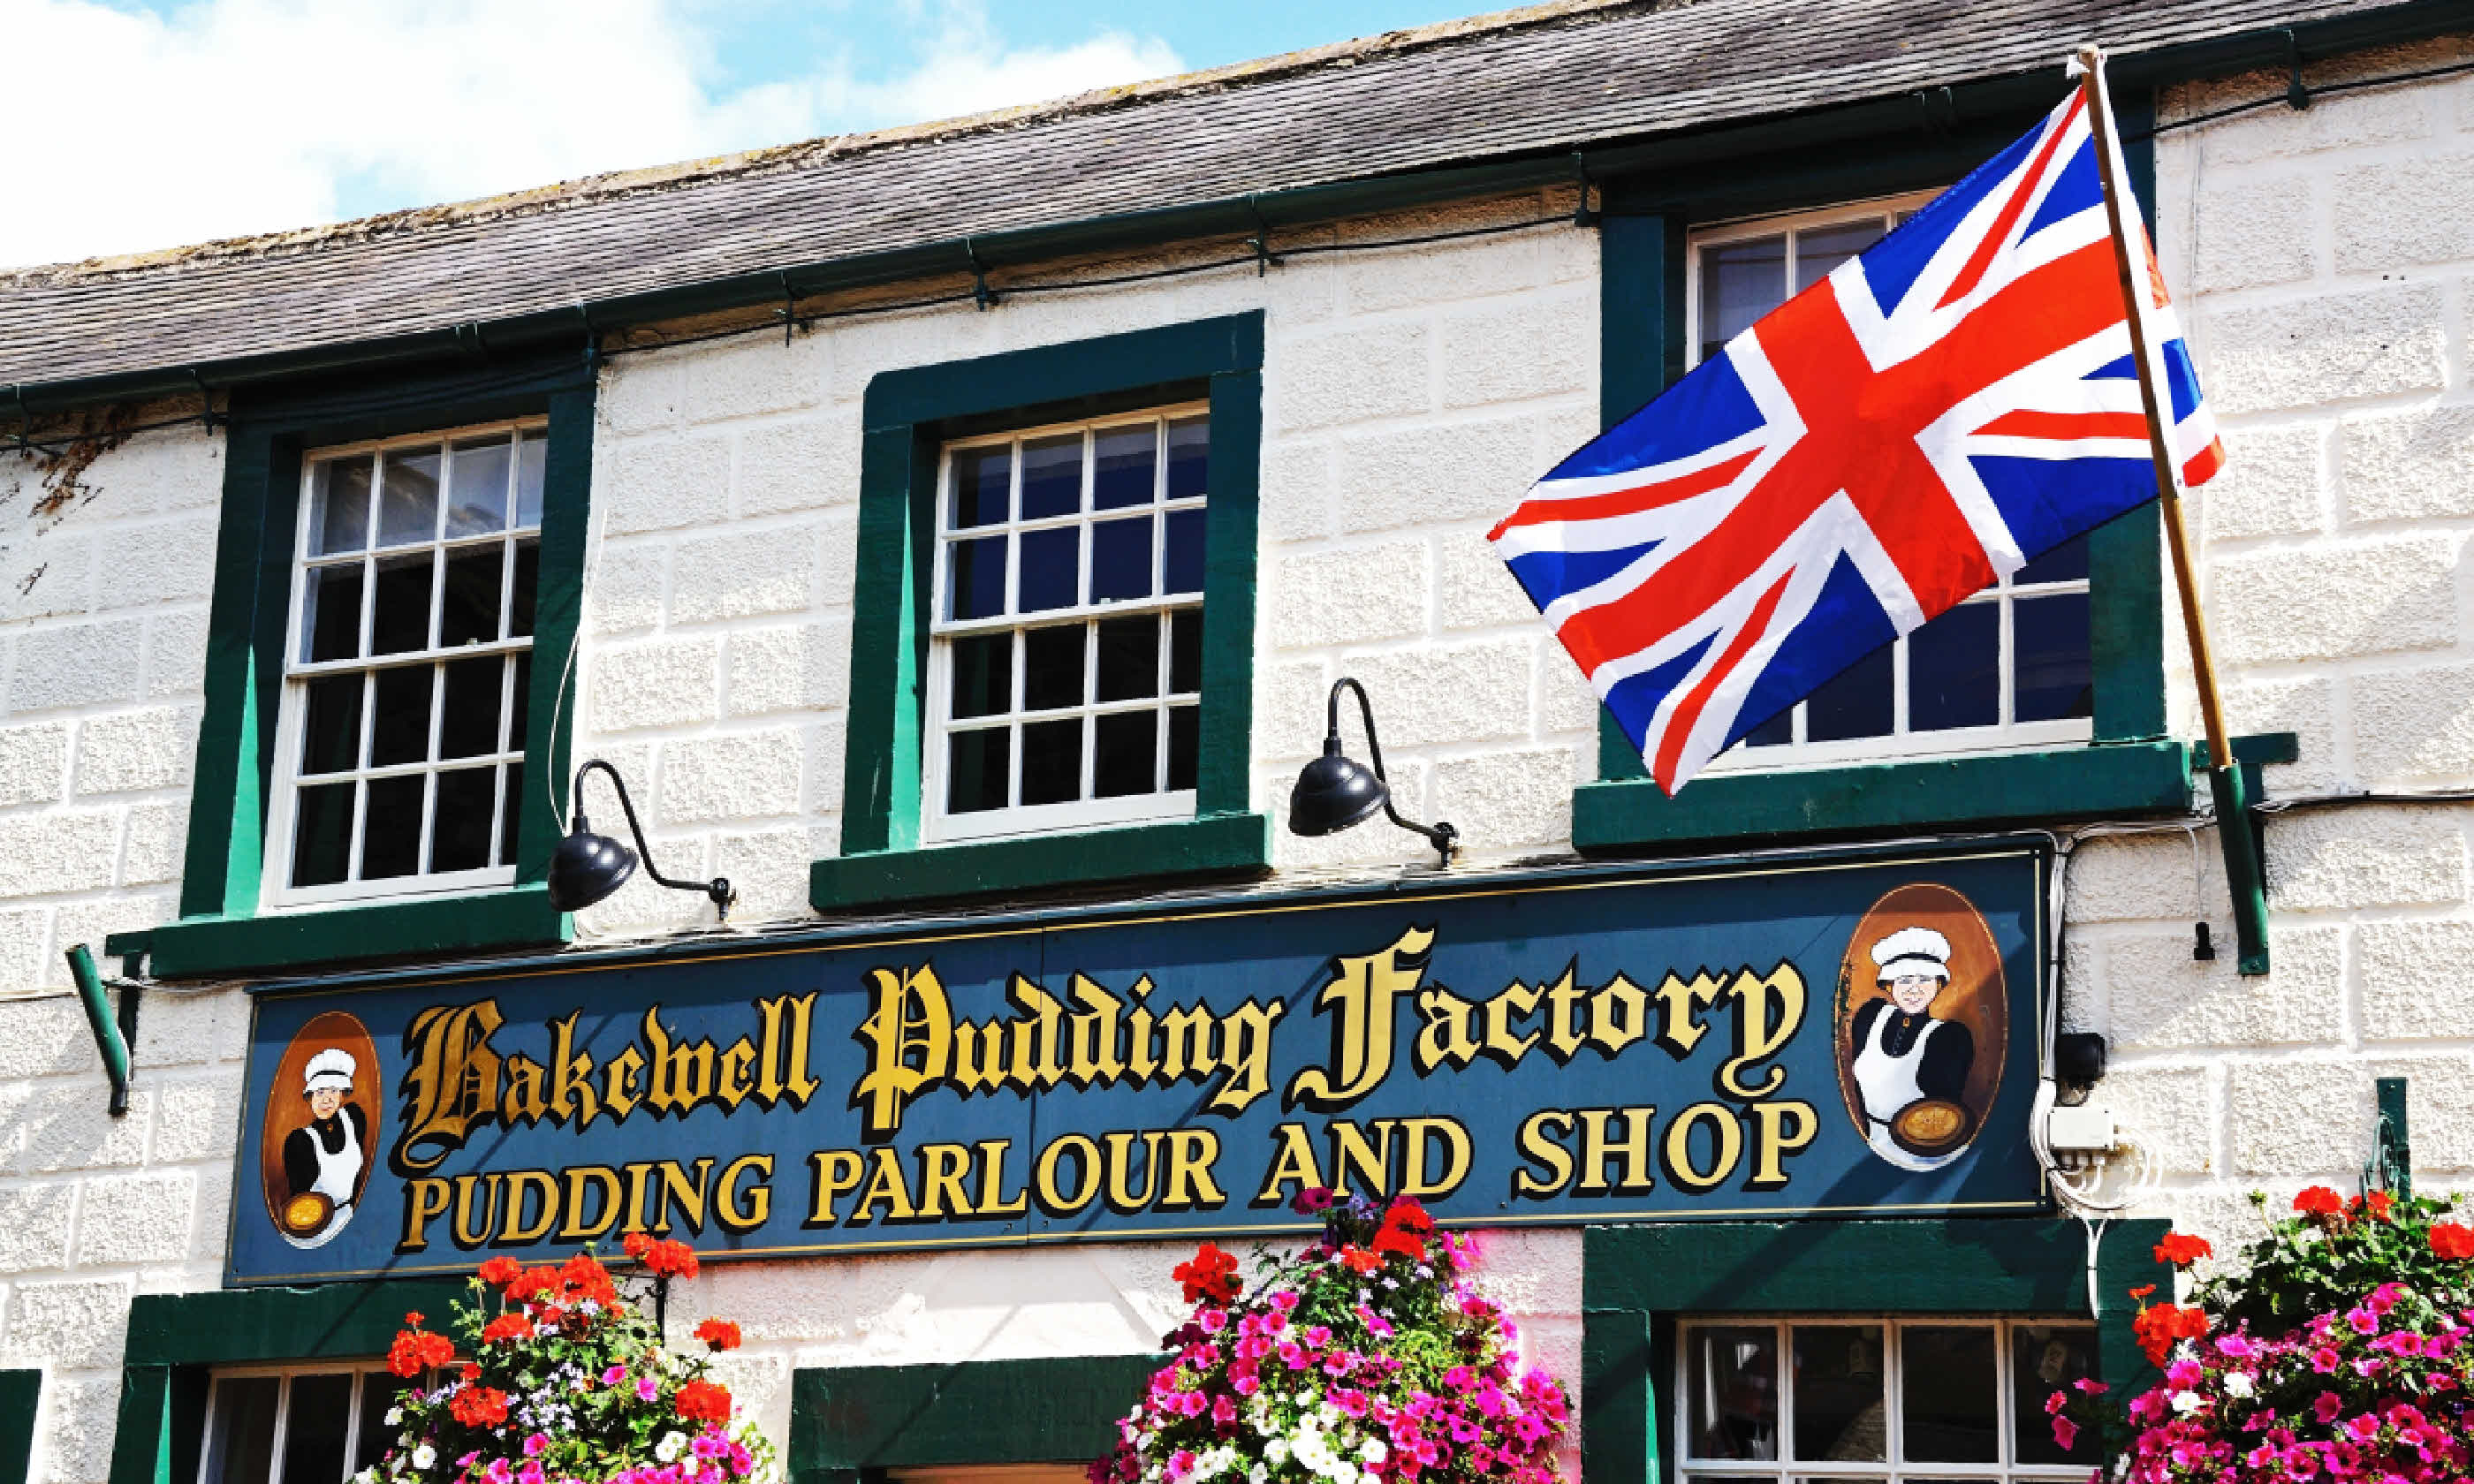 Bakewell Pudding Factory in Bakewell (Shutterstock: see credit below)